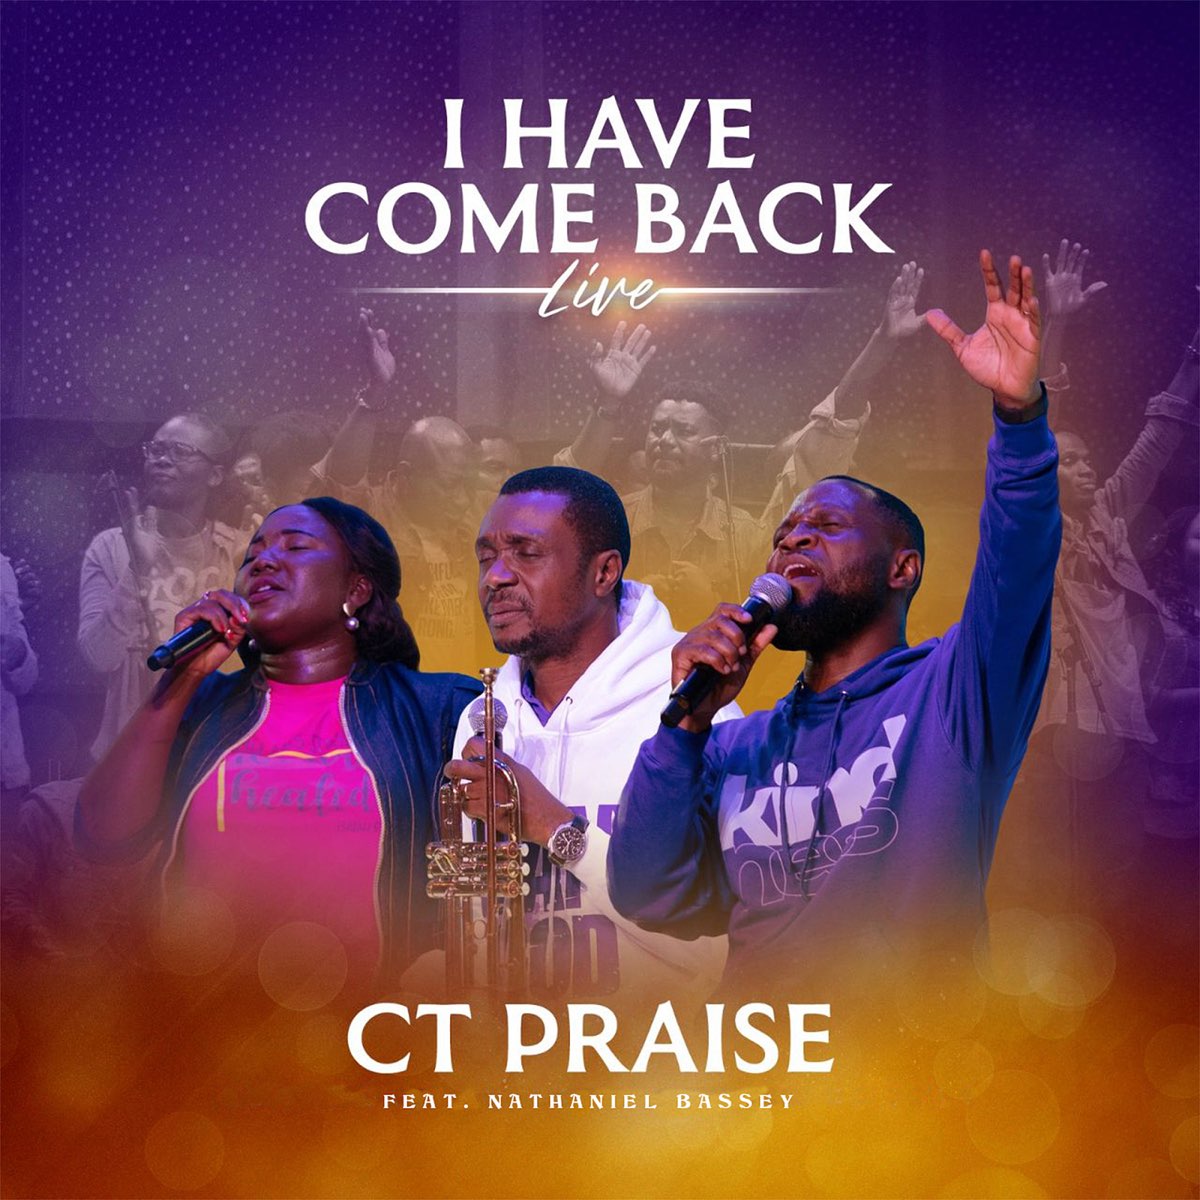 CT Praise - I Have Come Back (Live) Ft Nathaniel Bassey